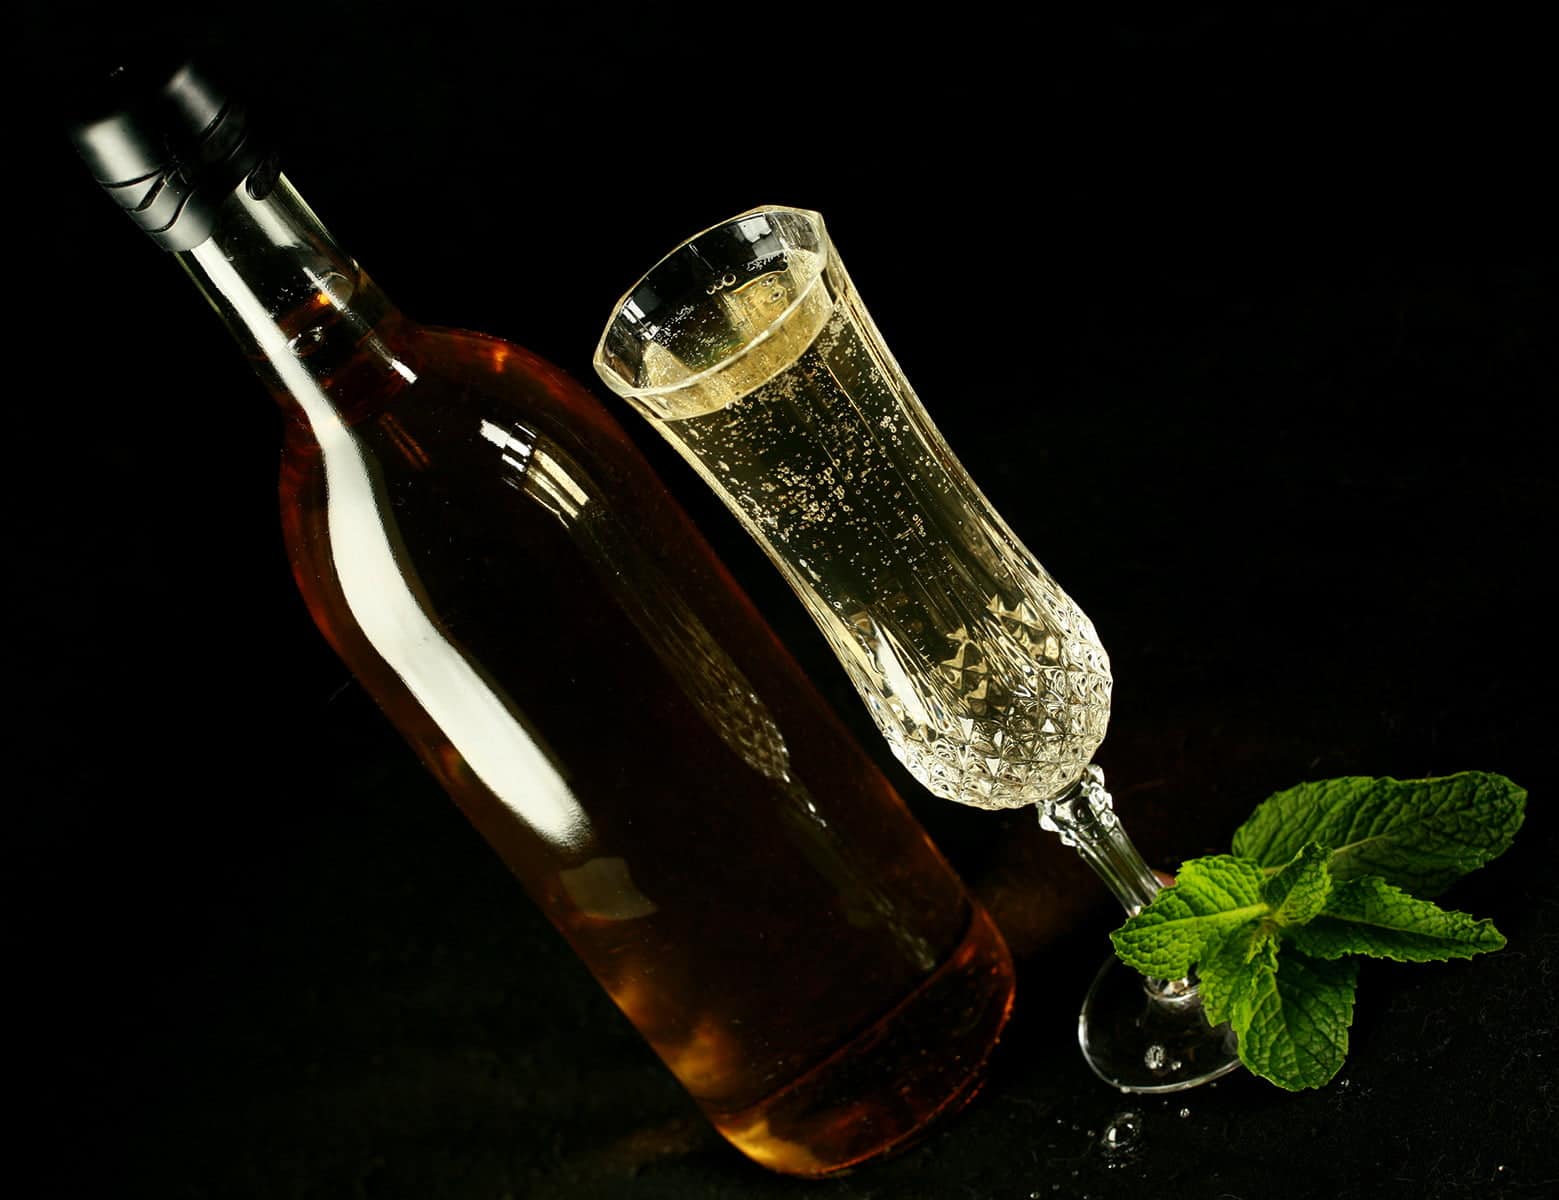 A full wine bottle and a glass of mint wine. There is a spring of mint at the base of the glass, everything is against a black background.